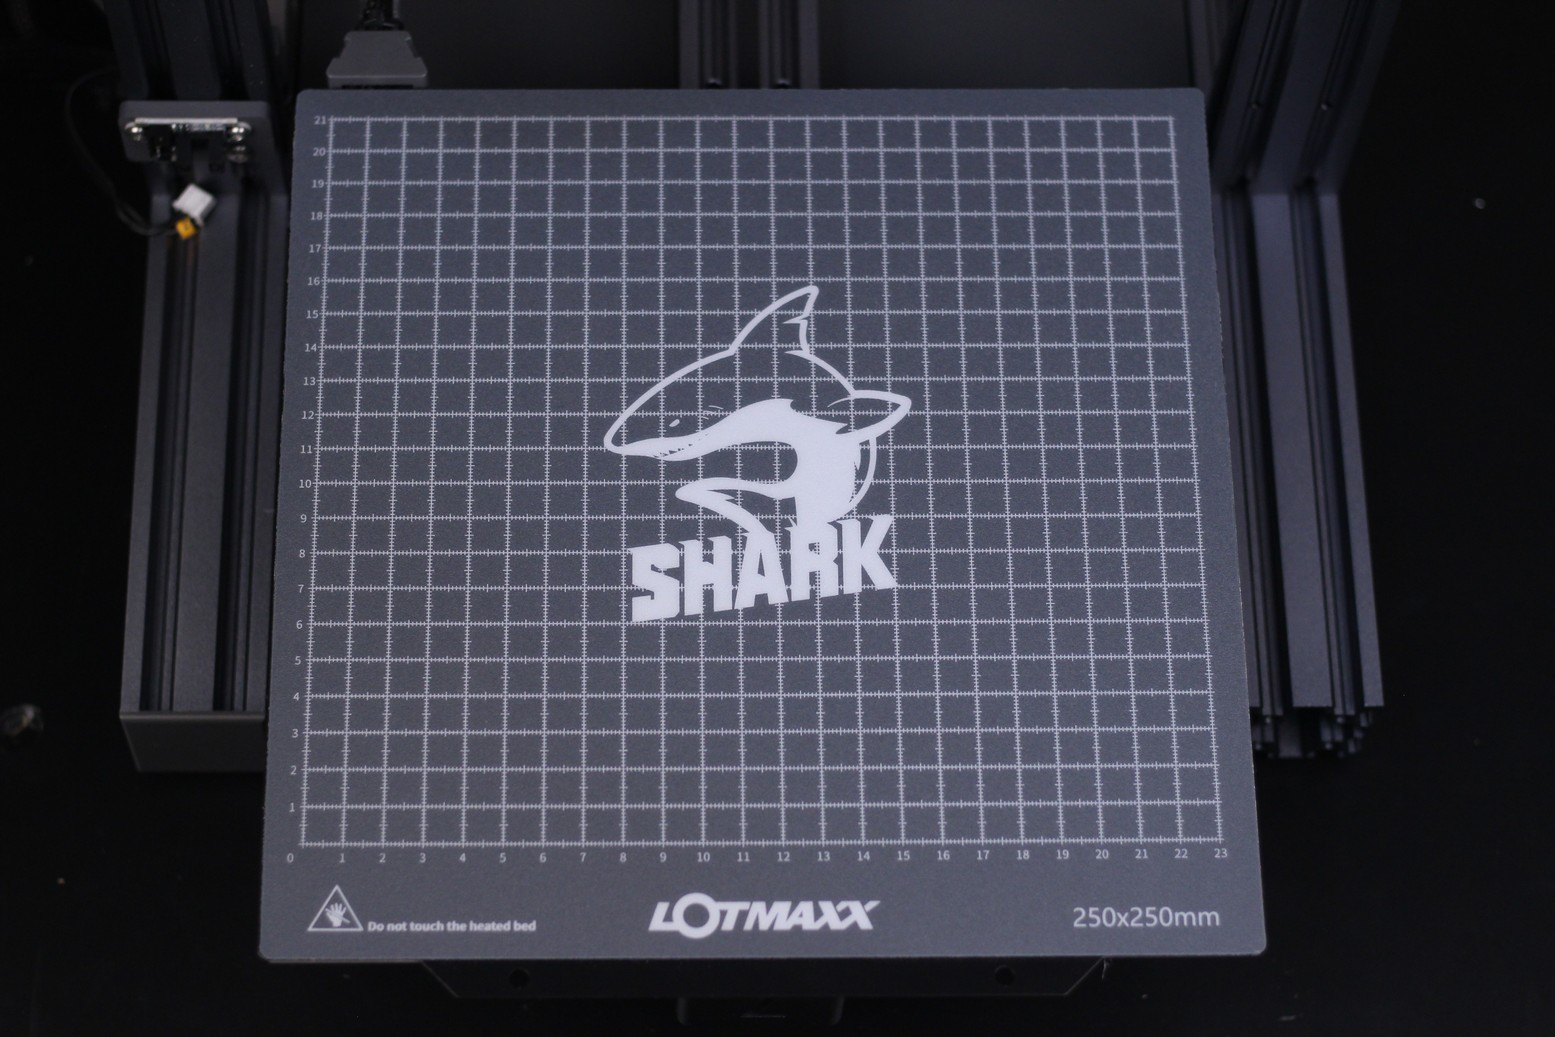 LOTMAXX Shark Magnetic Flex PLate 2 | LOTMAXX SC-10 Shark V2 Review: Dual Color Printing and Laser Engraving